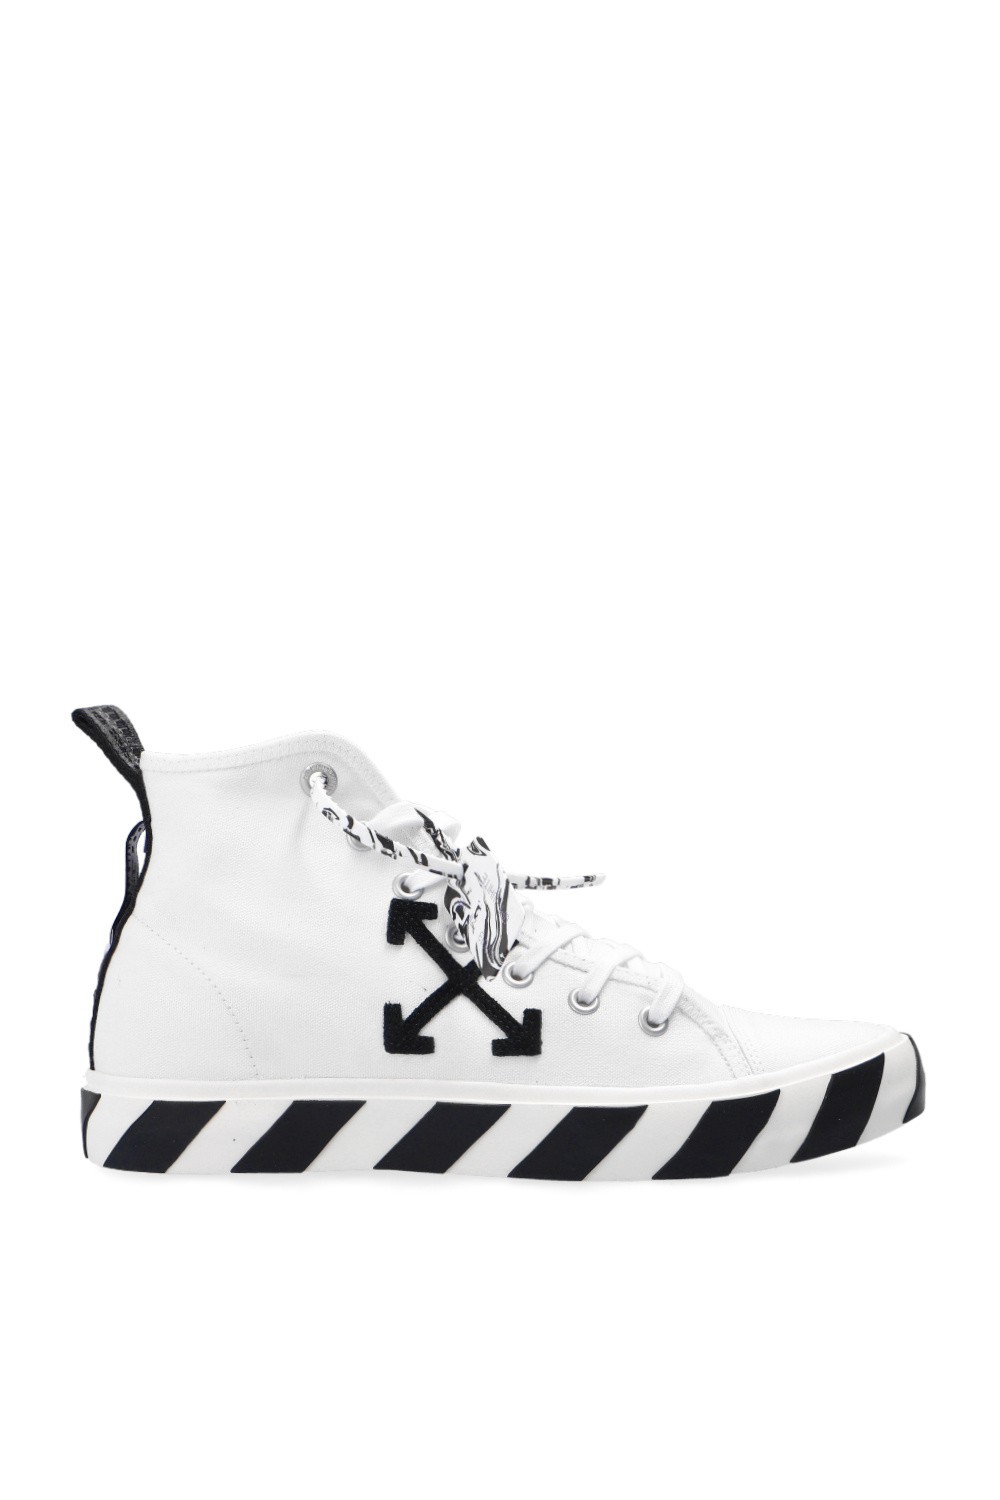 Off-White 'Mid Top Vulcanized' high-top sneakers | Men's Shoes 